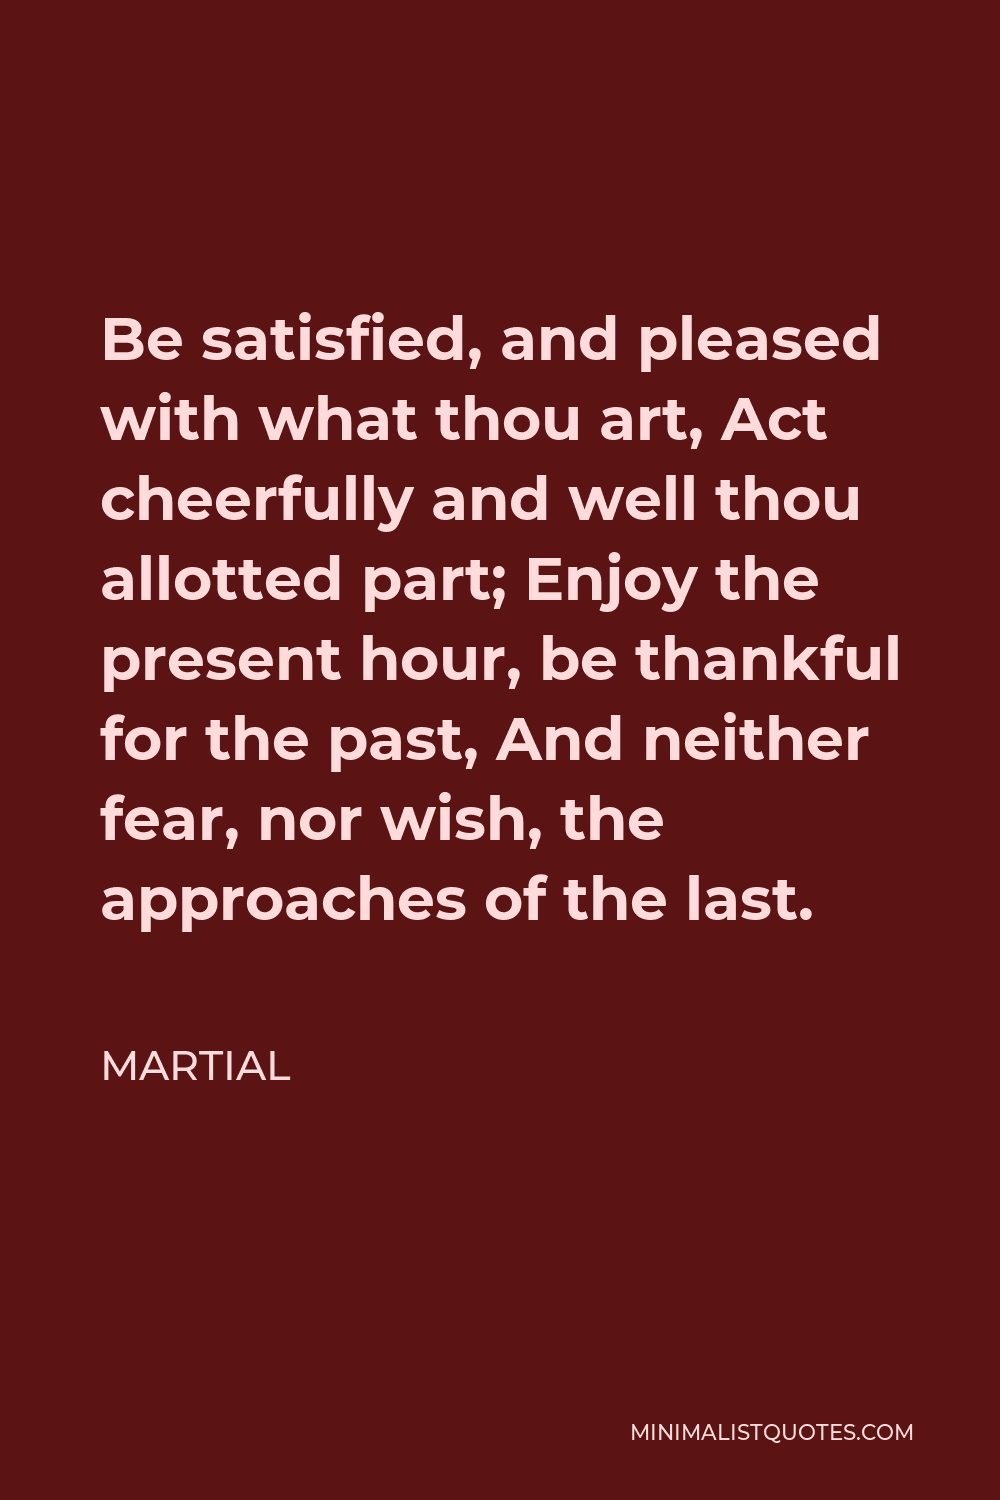 Martial Quote - Be satisfied, and pleased with what thou art, Act cheerfully and well thou allotted part; Enjoy the present hour, be thankful for the past, And neither fear, nor wish, the approaches of the last.